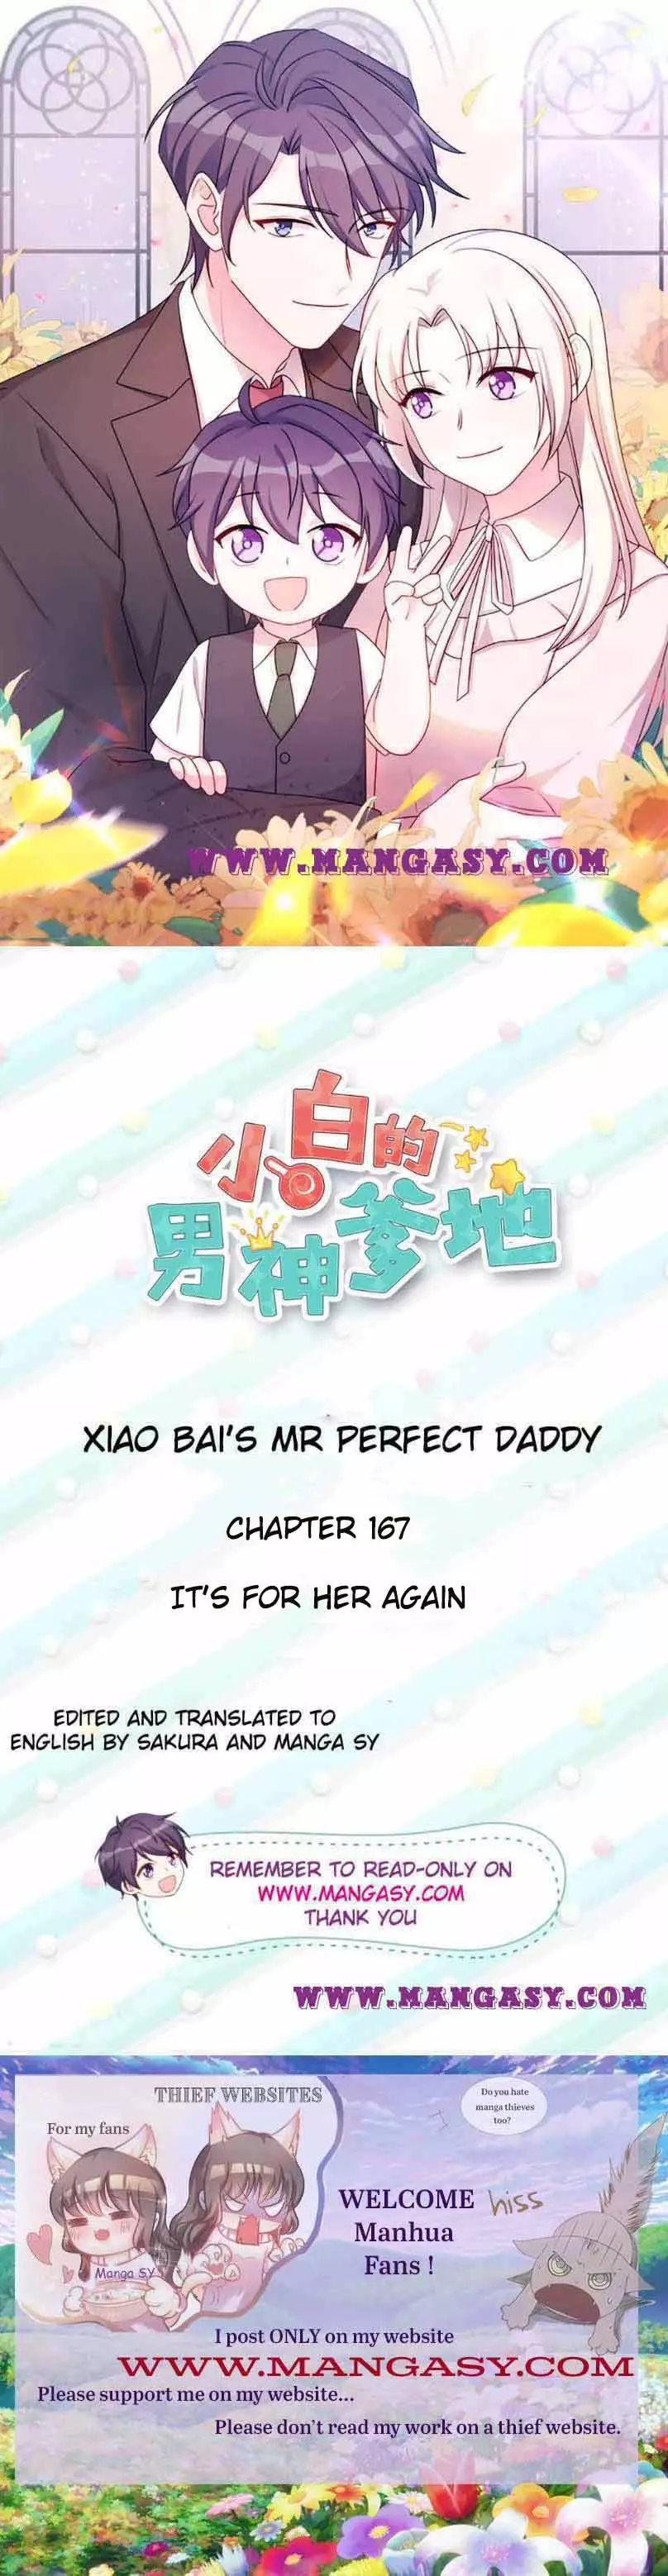 Xiao Bai’S Father Is A Wonderful Person - 167 page 1-bb10a580